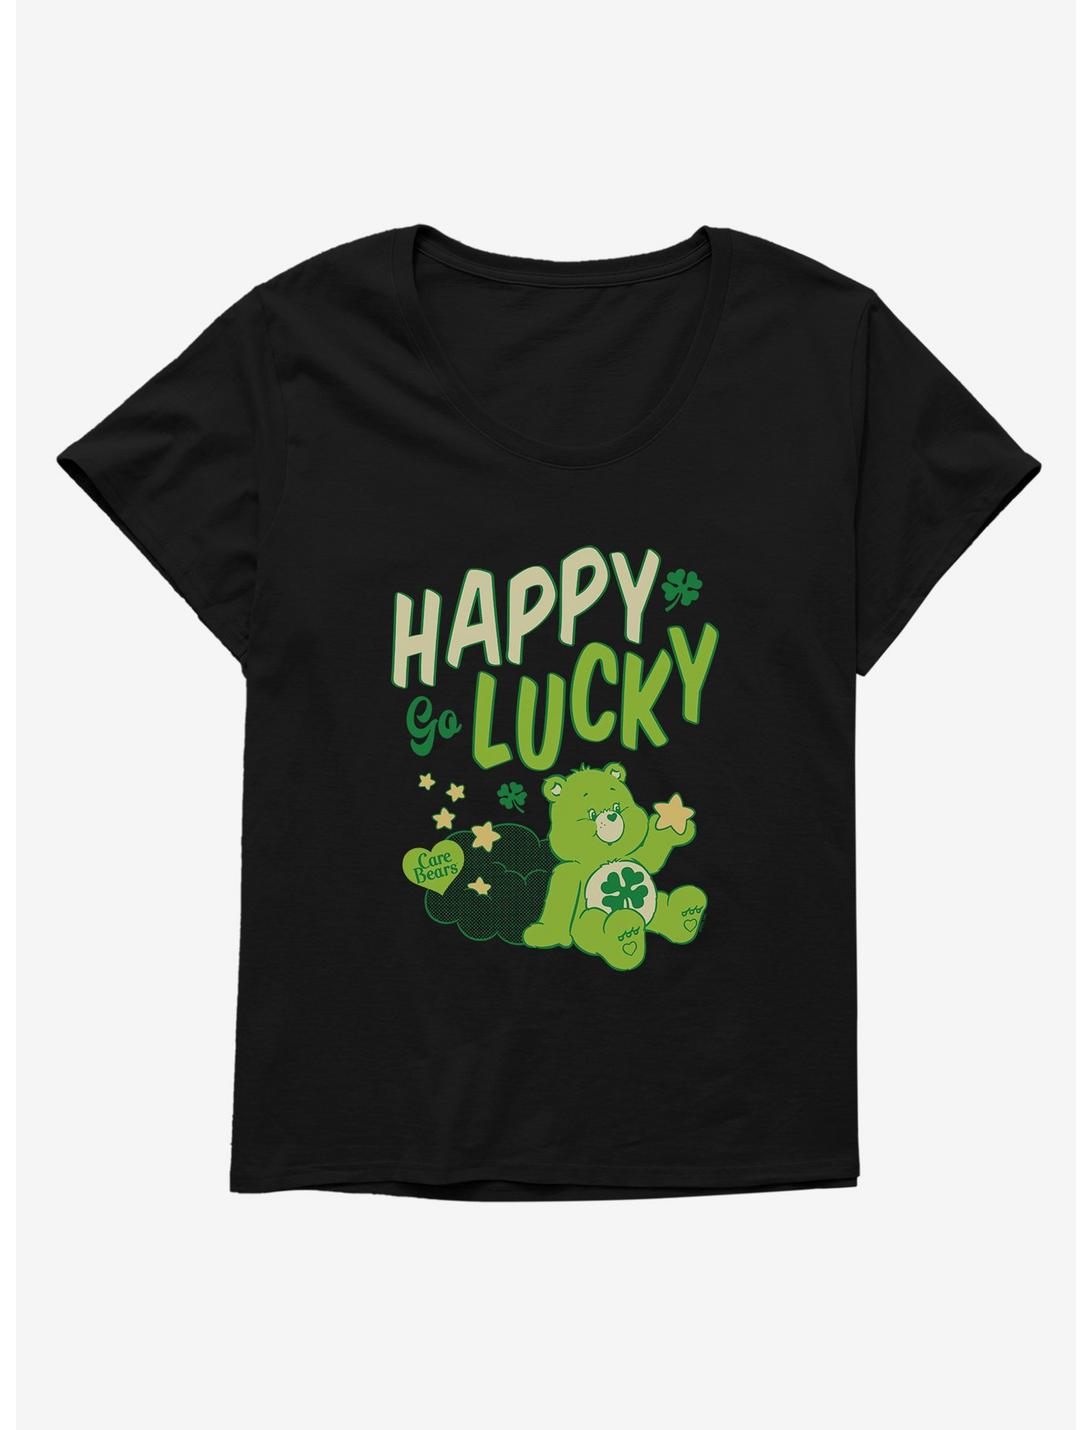 Care Bears Happy Go Lucky Womens T-Shirt Plus Size, BLACK, hi-res